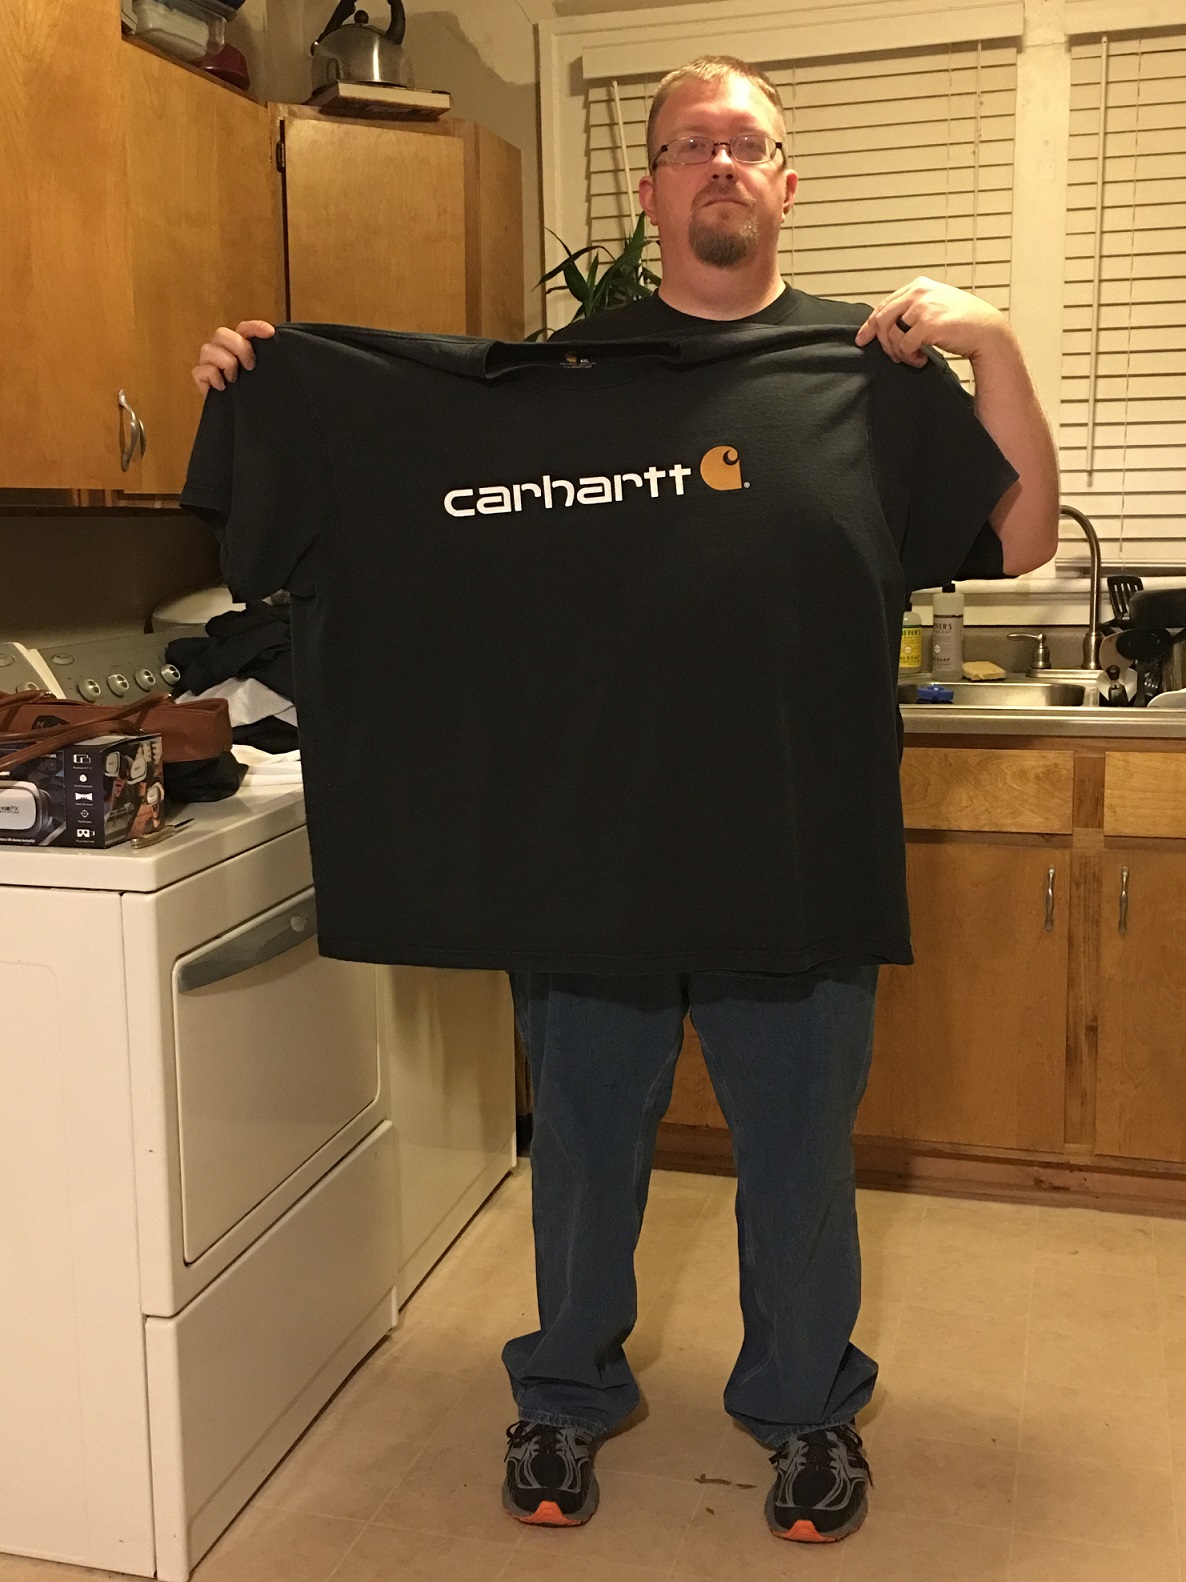 Aaron holds an old Carhartt t-shirt up to his body to show the extent of his weight loss.